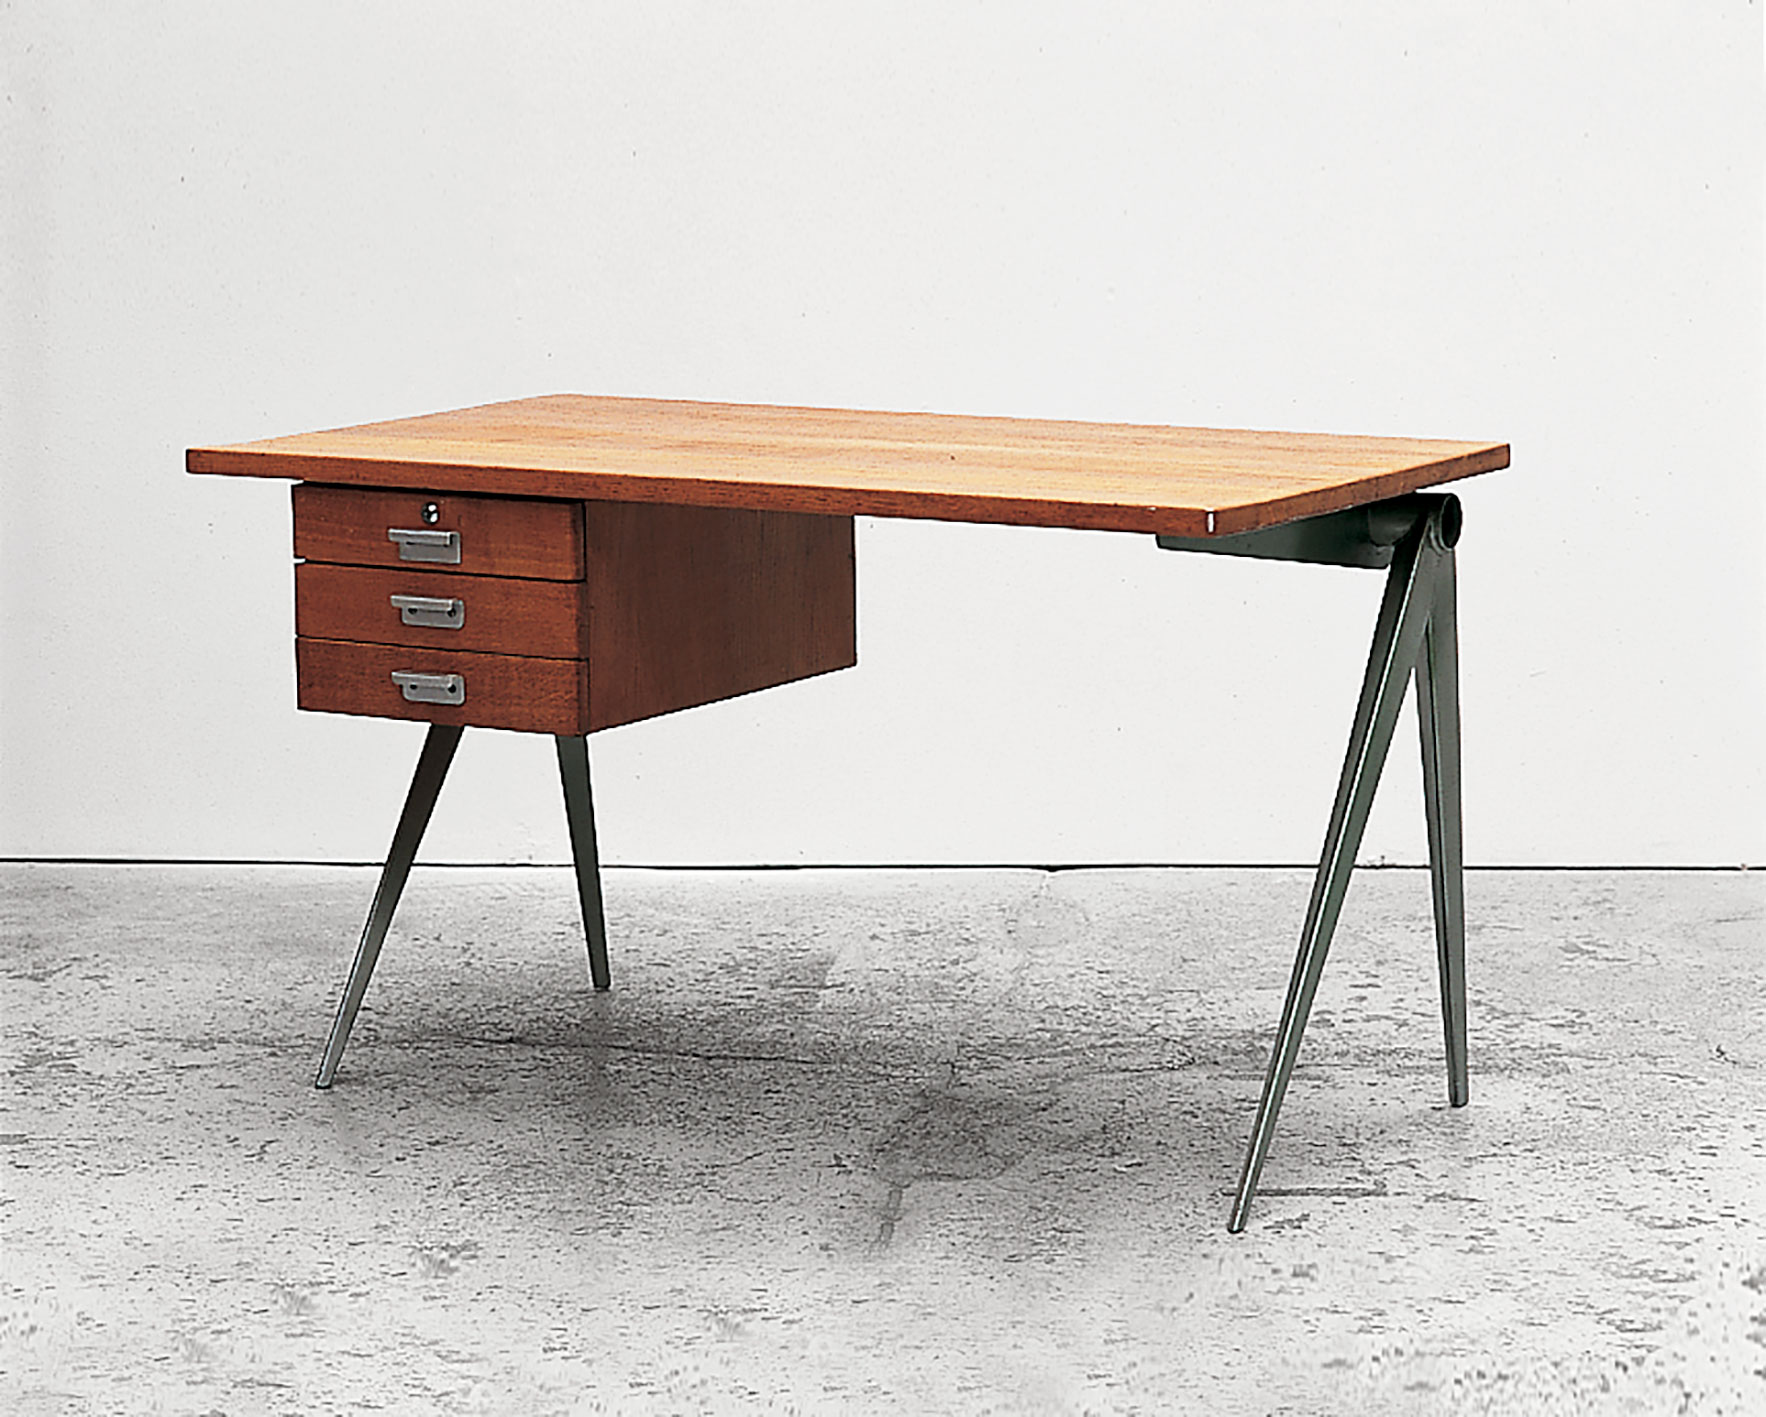 Direction desk with Compas base, variant with open tube crossmember, ca. 1956.